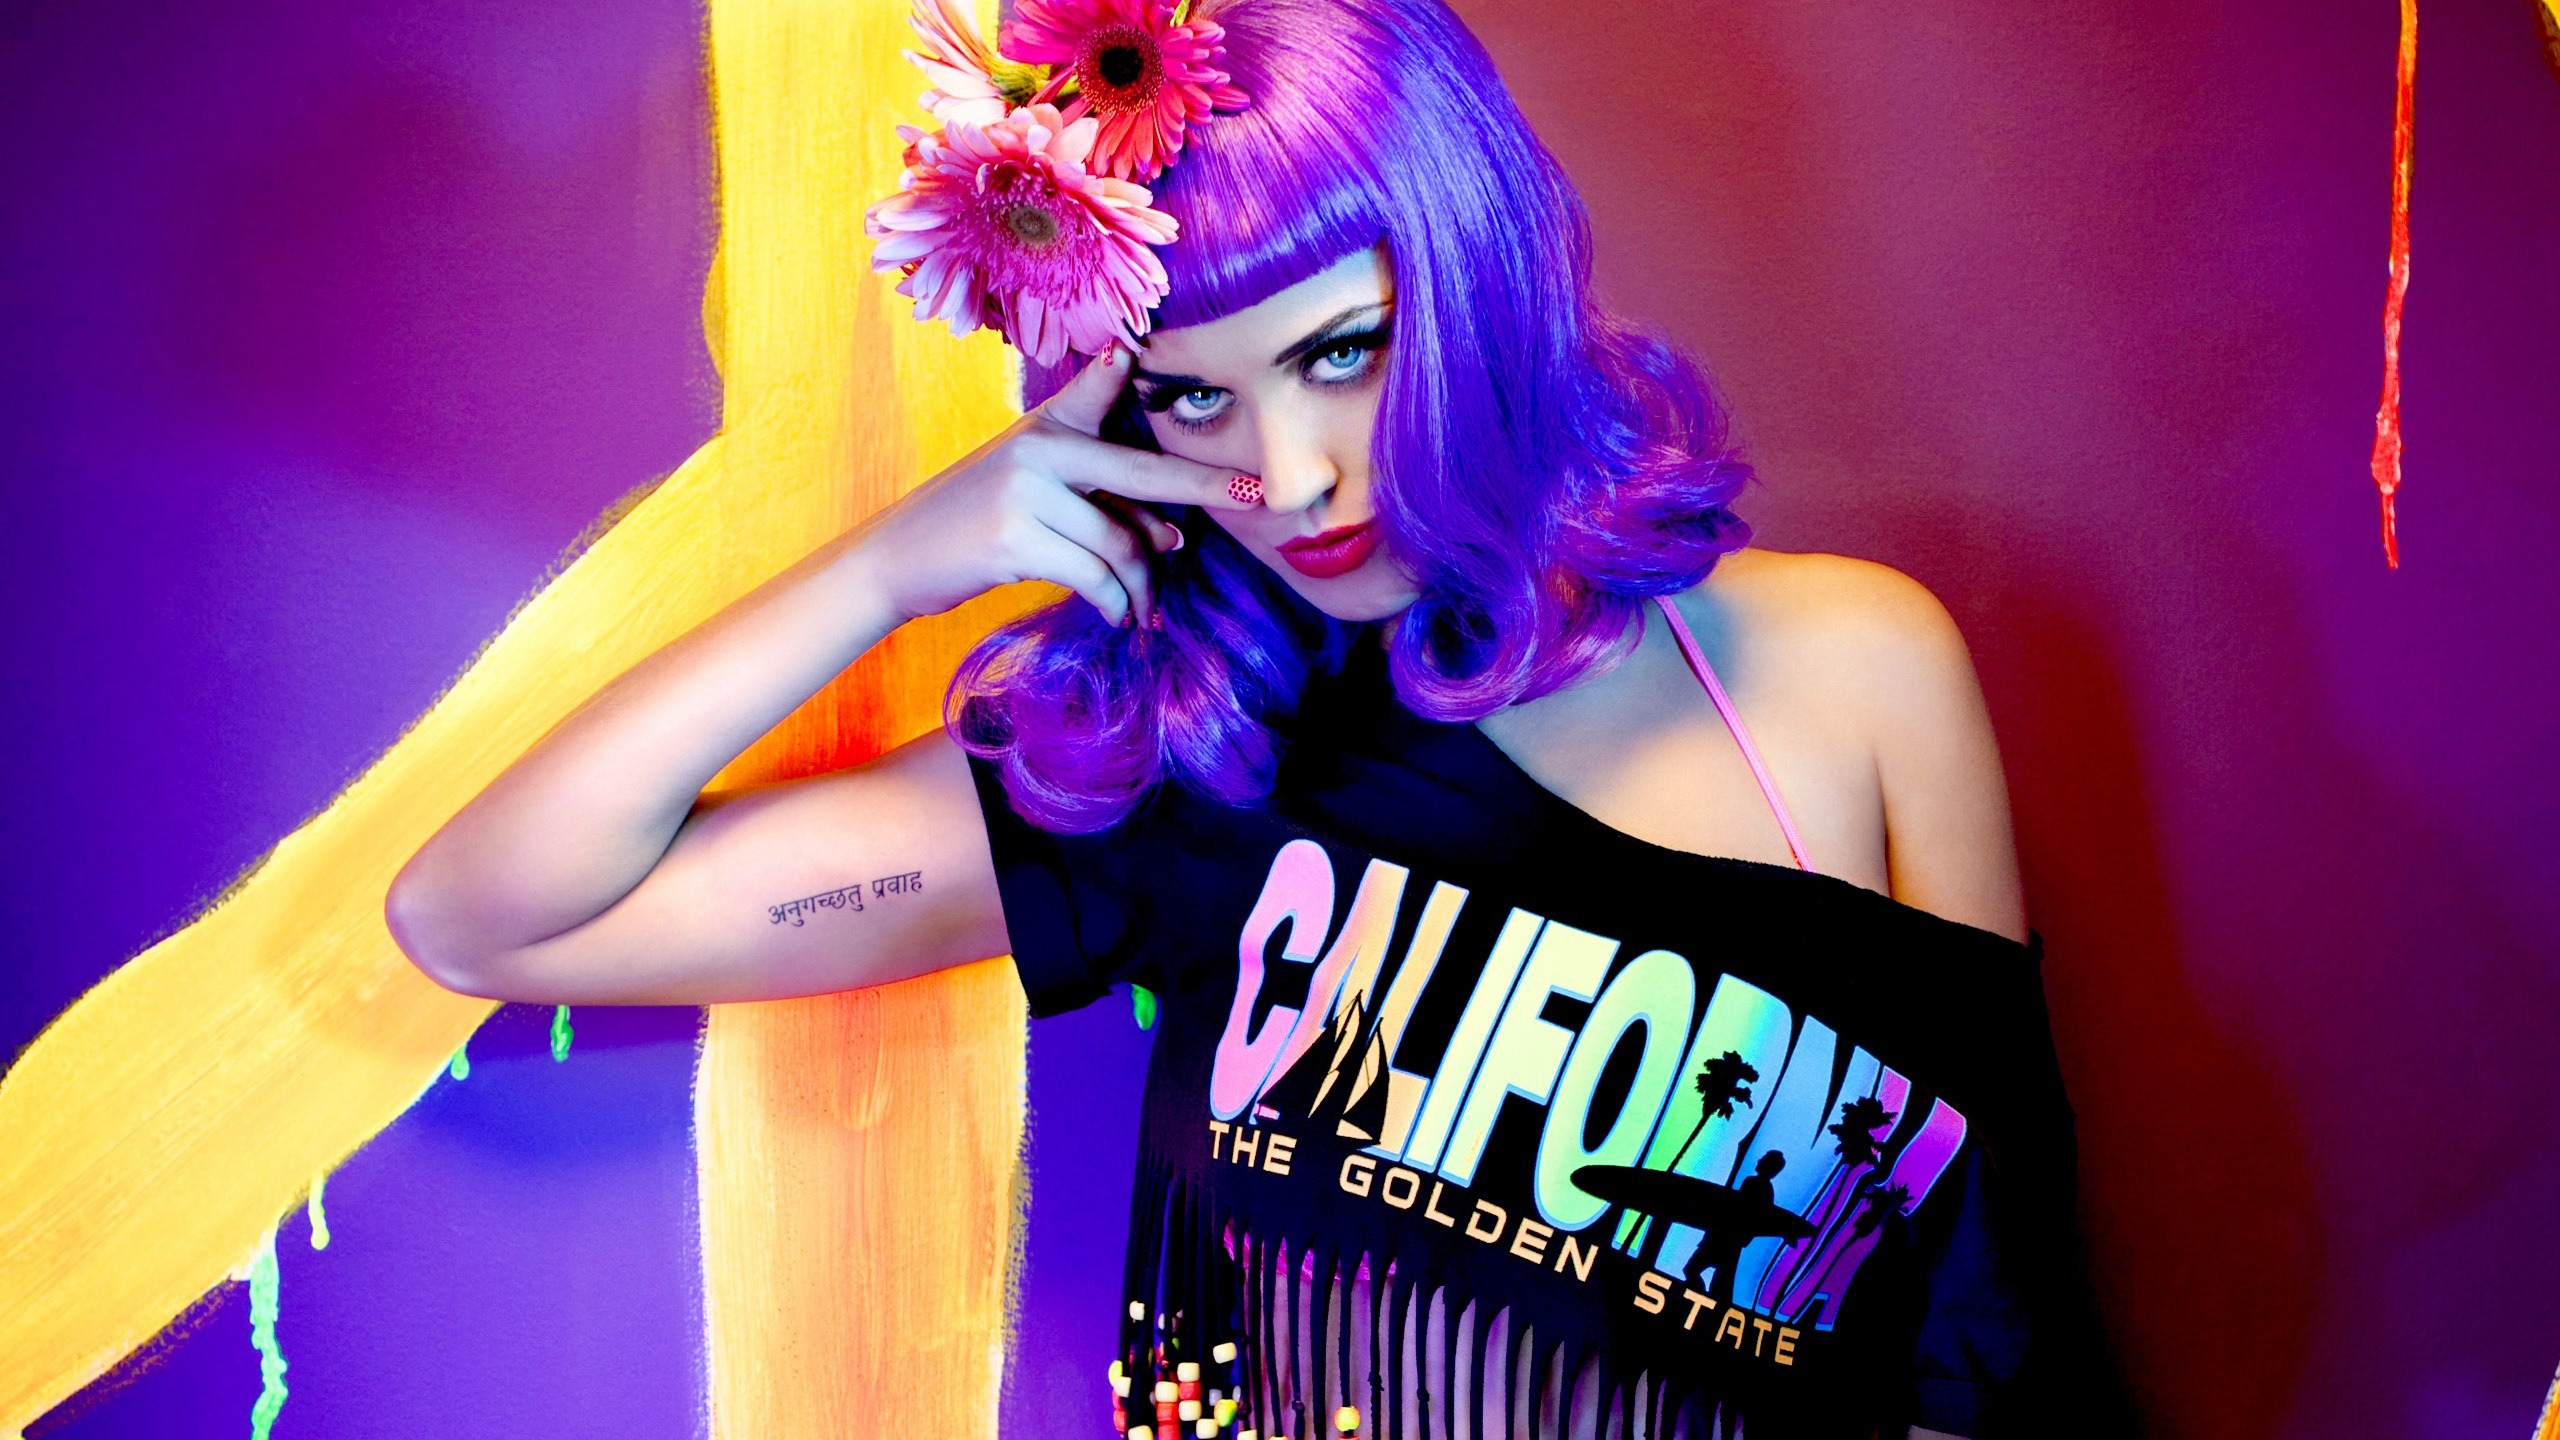 Katy Perry California for 2560x1440 HDTV resolution